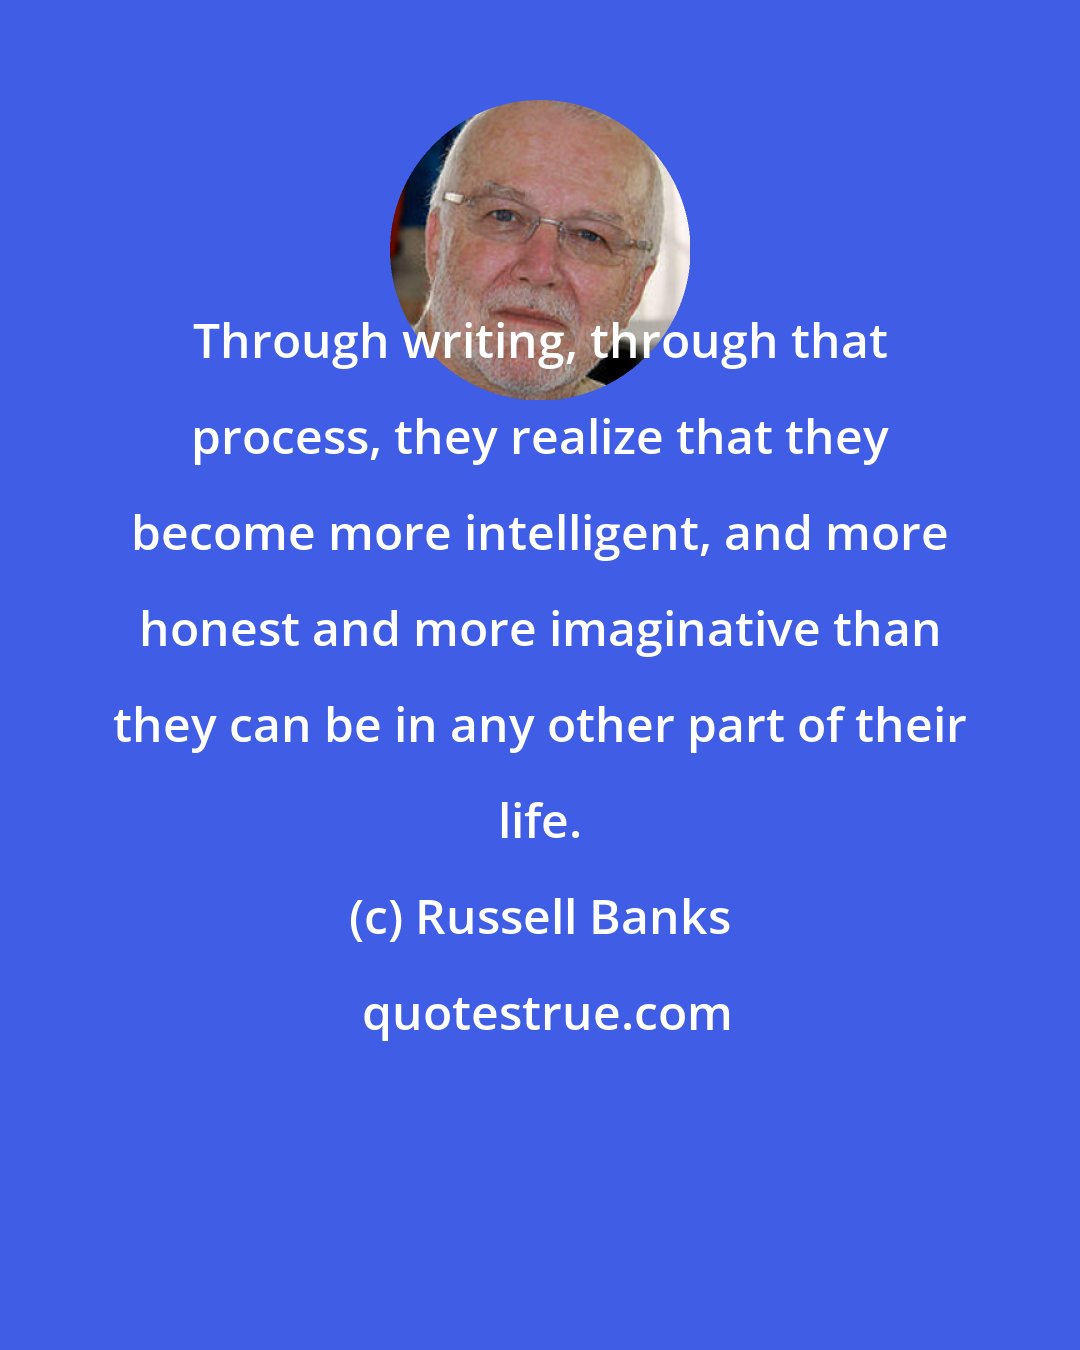 Russell Banks: Through writing, through that process, they realize that they become more intelligent, and more honest and more imaginative than they can be in any other part of their life.